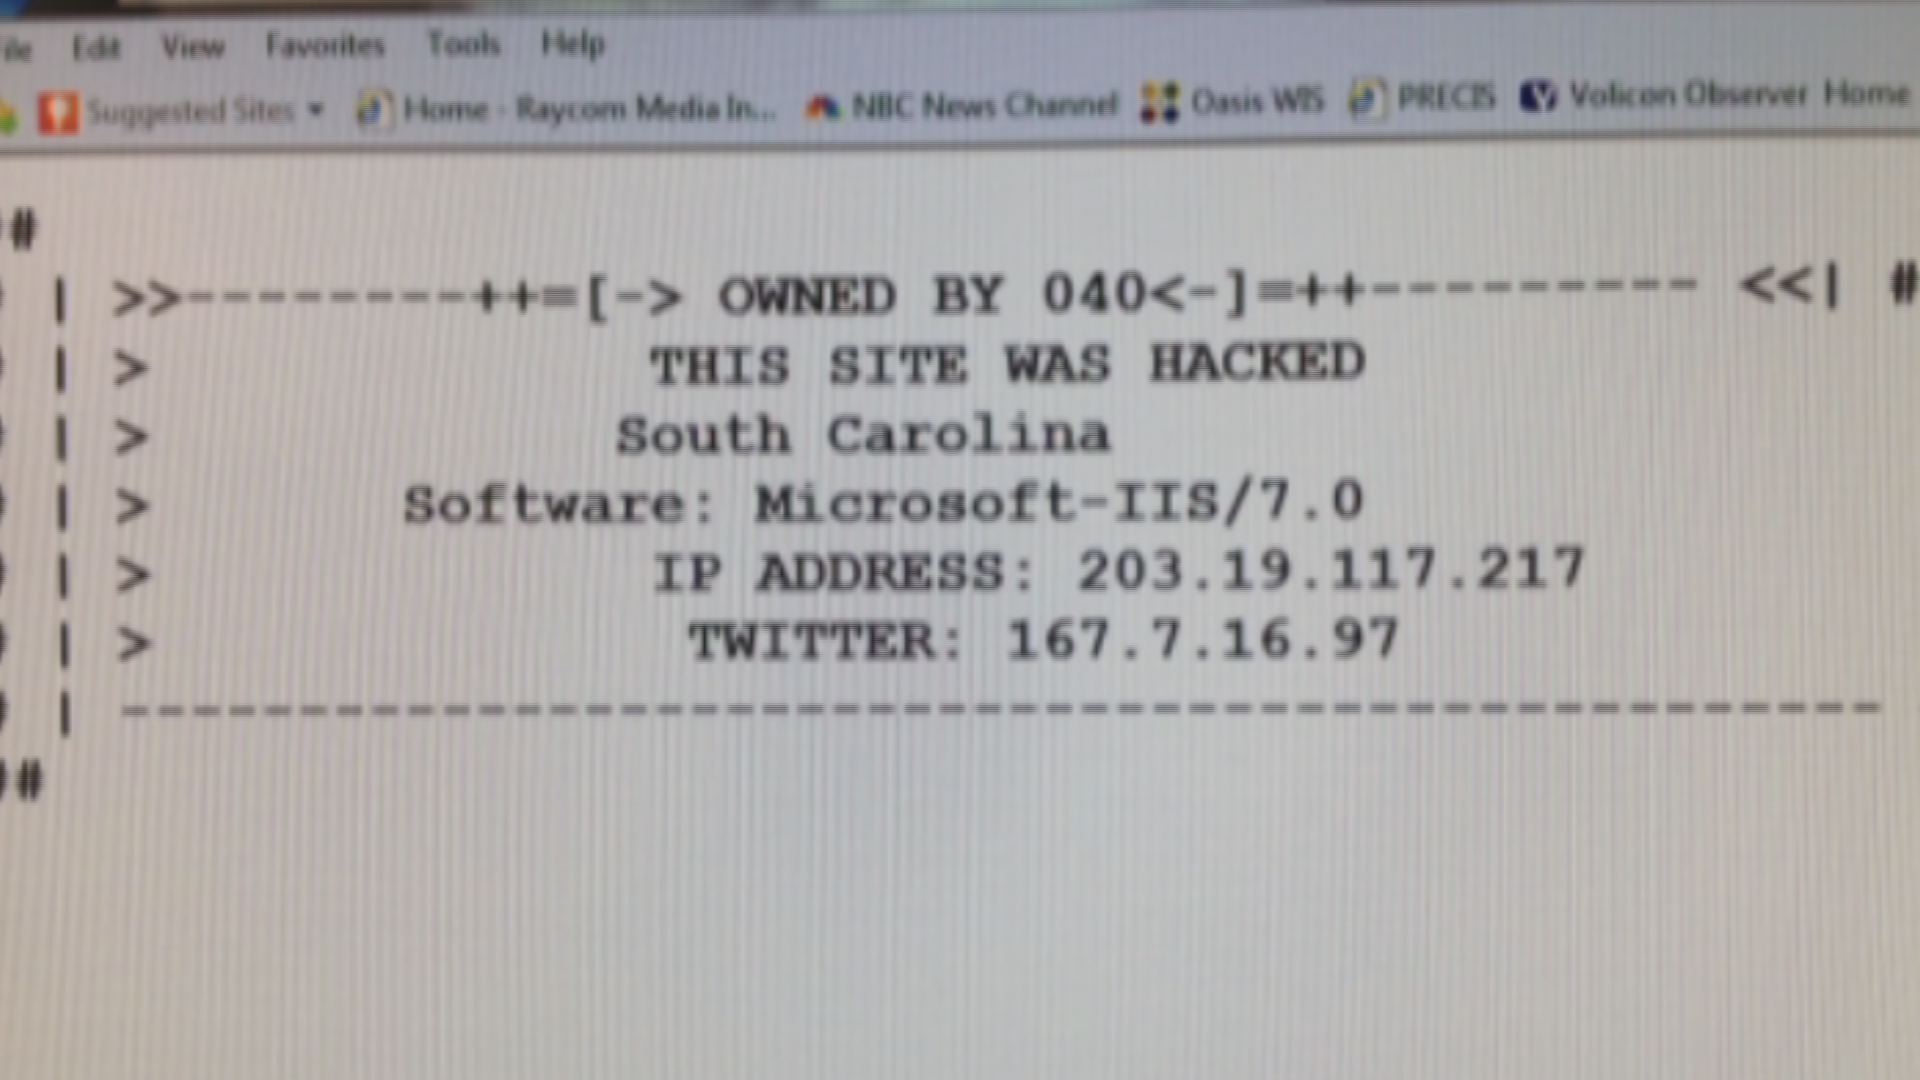 Department of Employment and Workforce-hacked